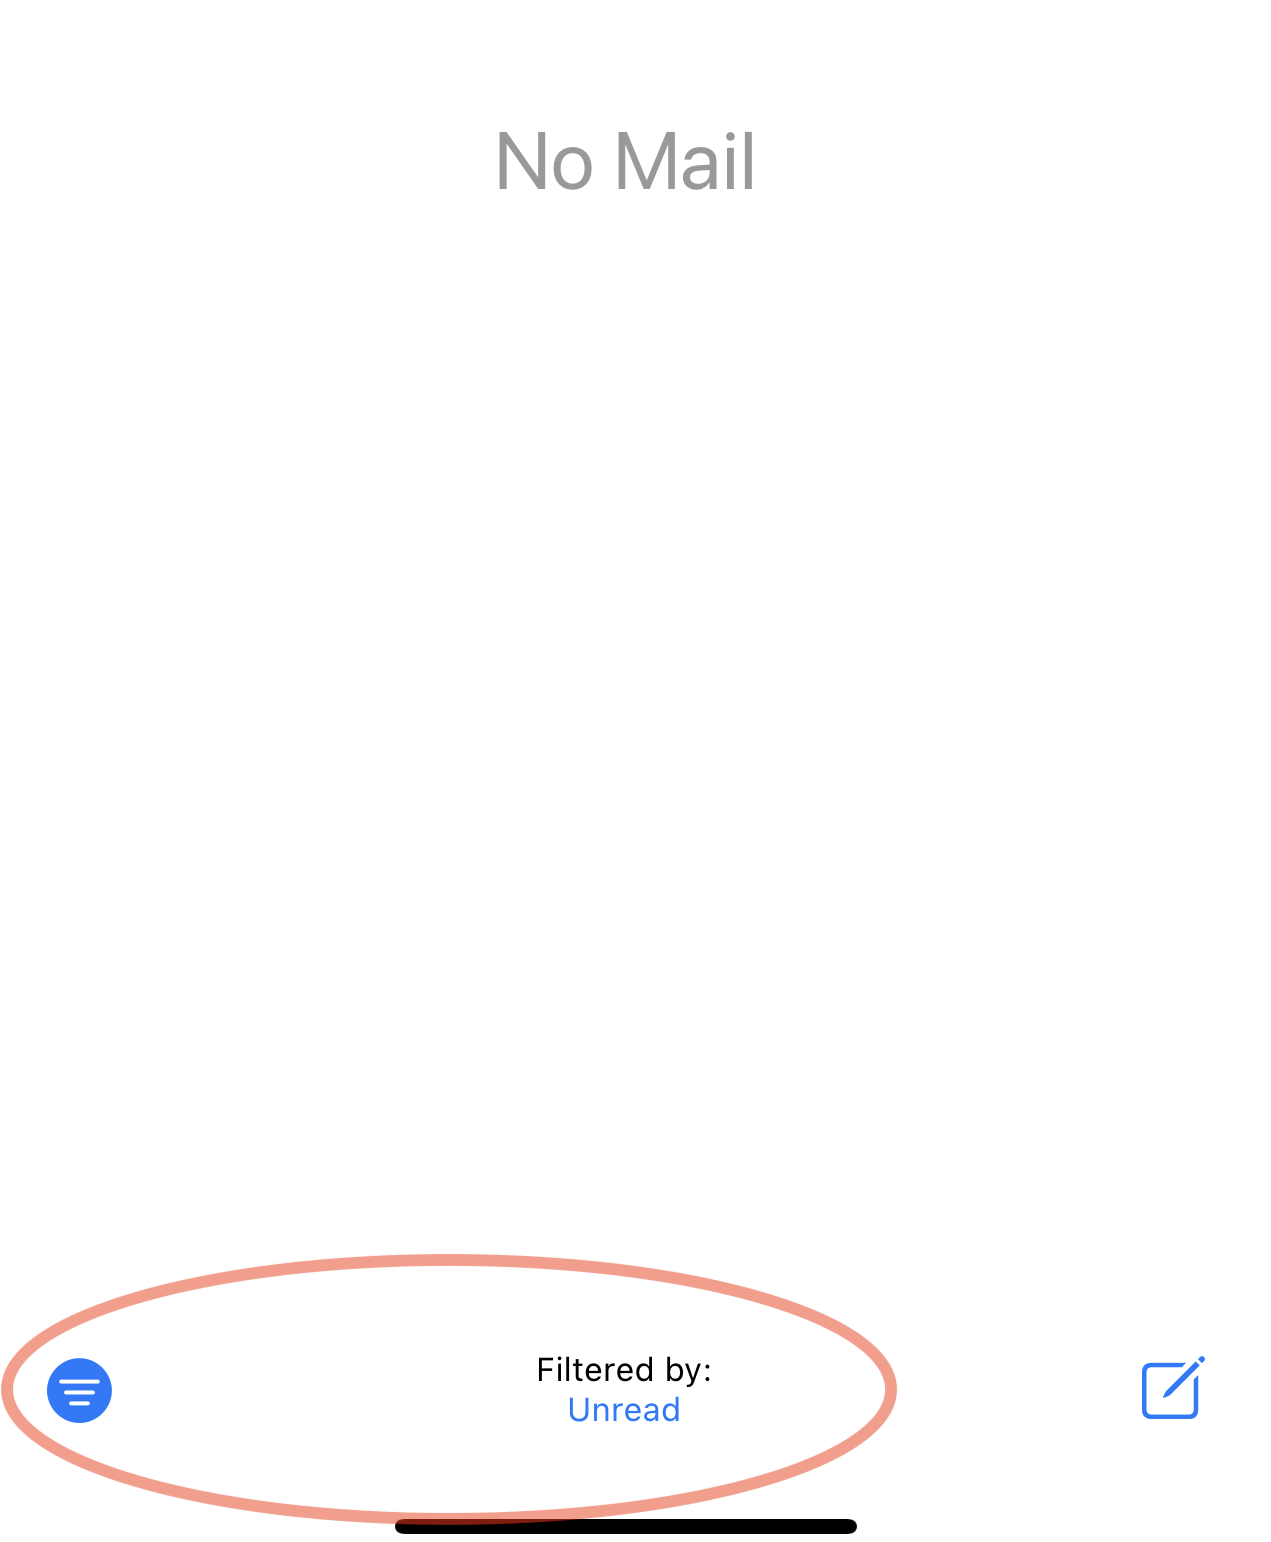 iOS No Mail filtered